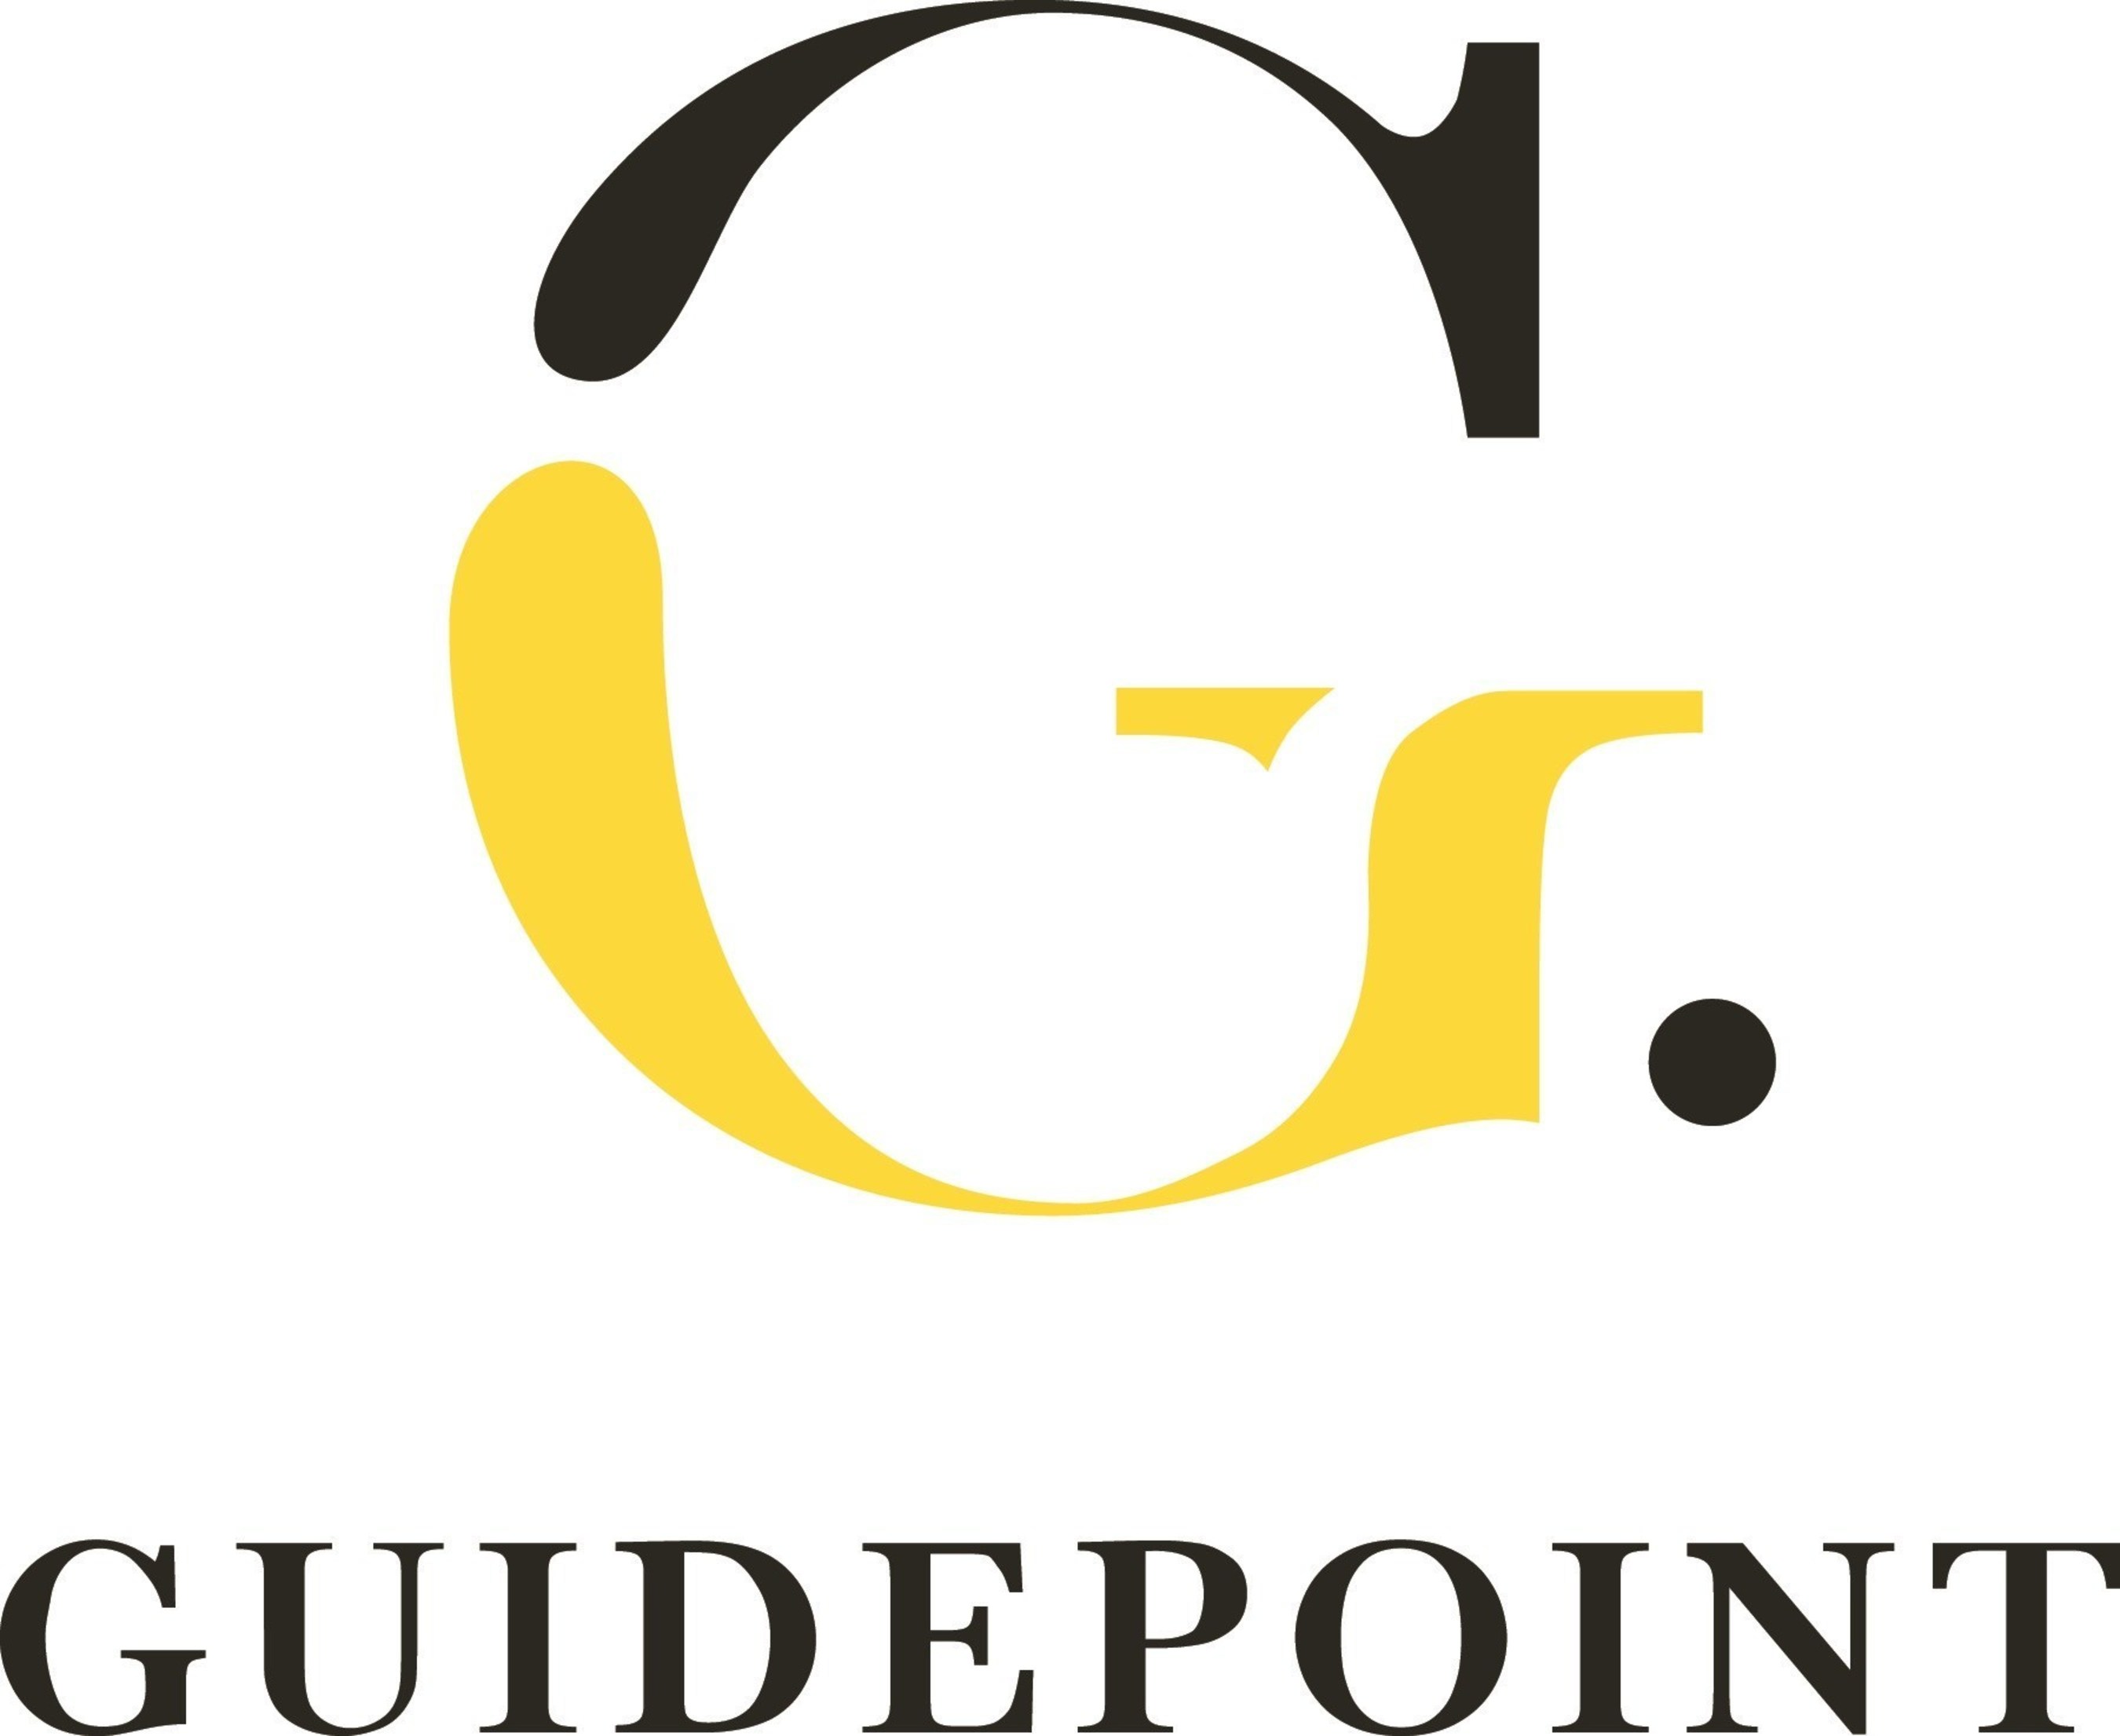 Guidepoint, the experts at finding expertise, is a leading global research services firm that helps to answer professionals' most pressing business questions by opening unique windows into the minds of the most insightful, experienced, and enlightening experts. Since 2003, Guidepoint has set up more than 500,000 interactions between business decision-makers / researchers and knowledgeable independent experts.